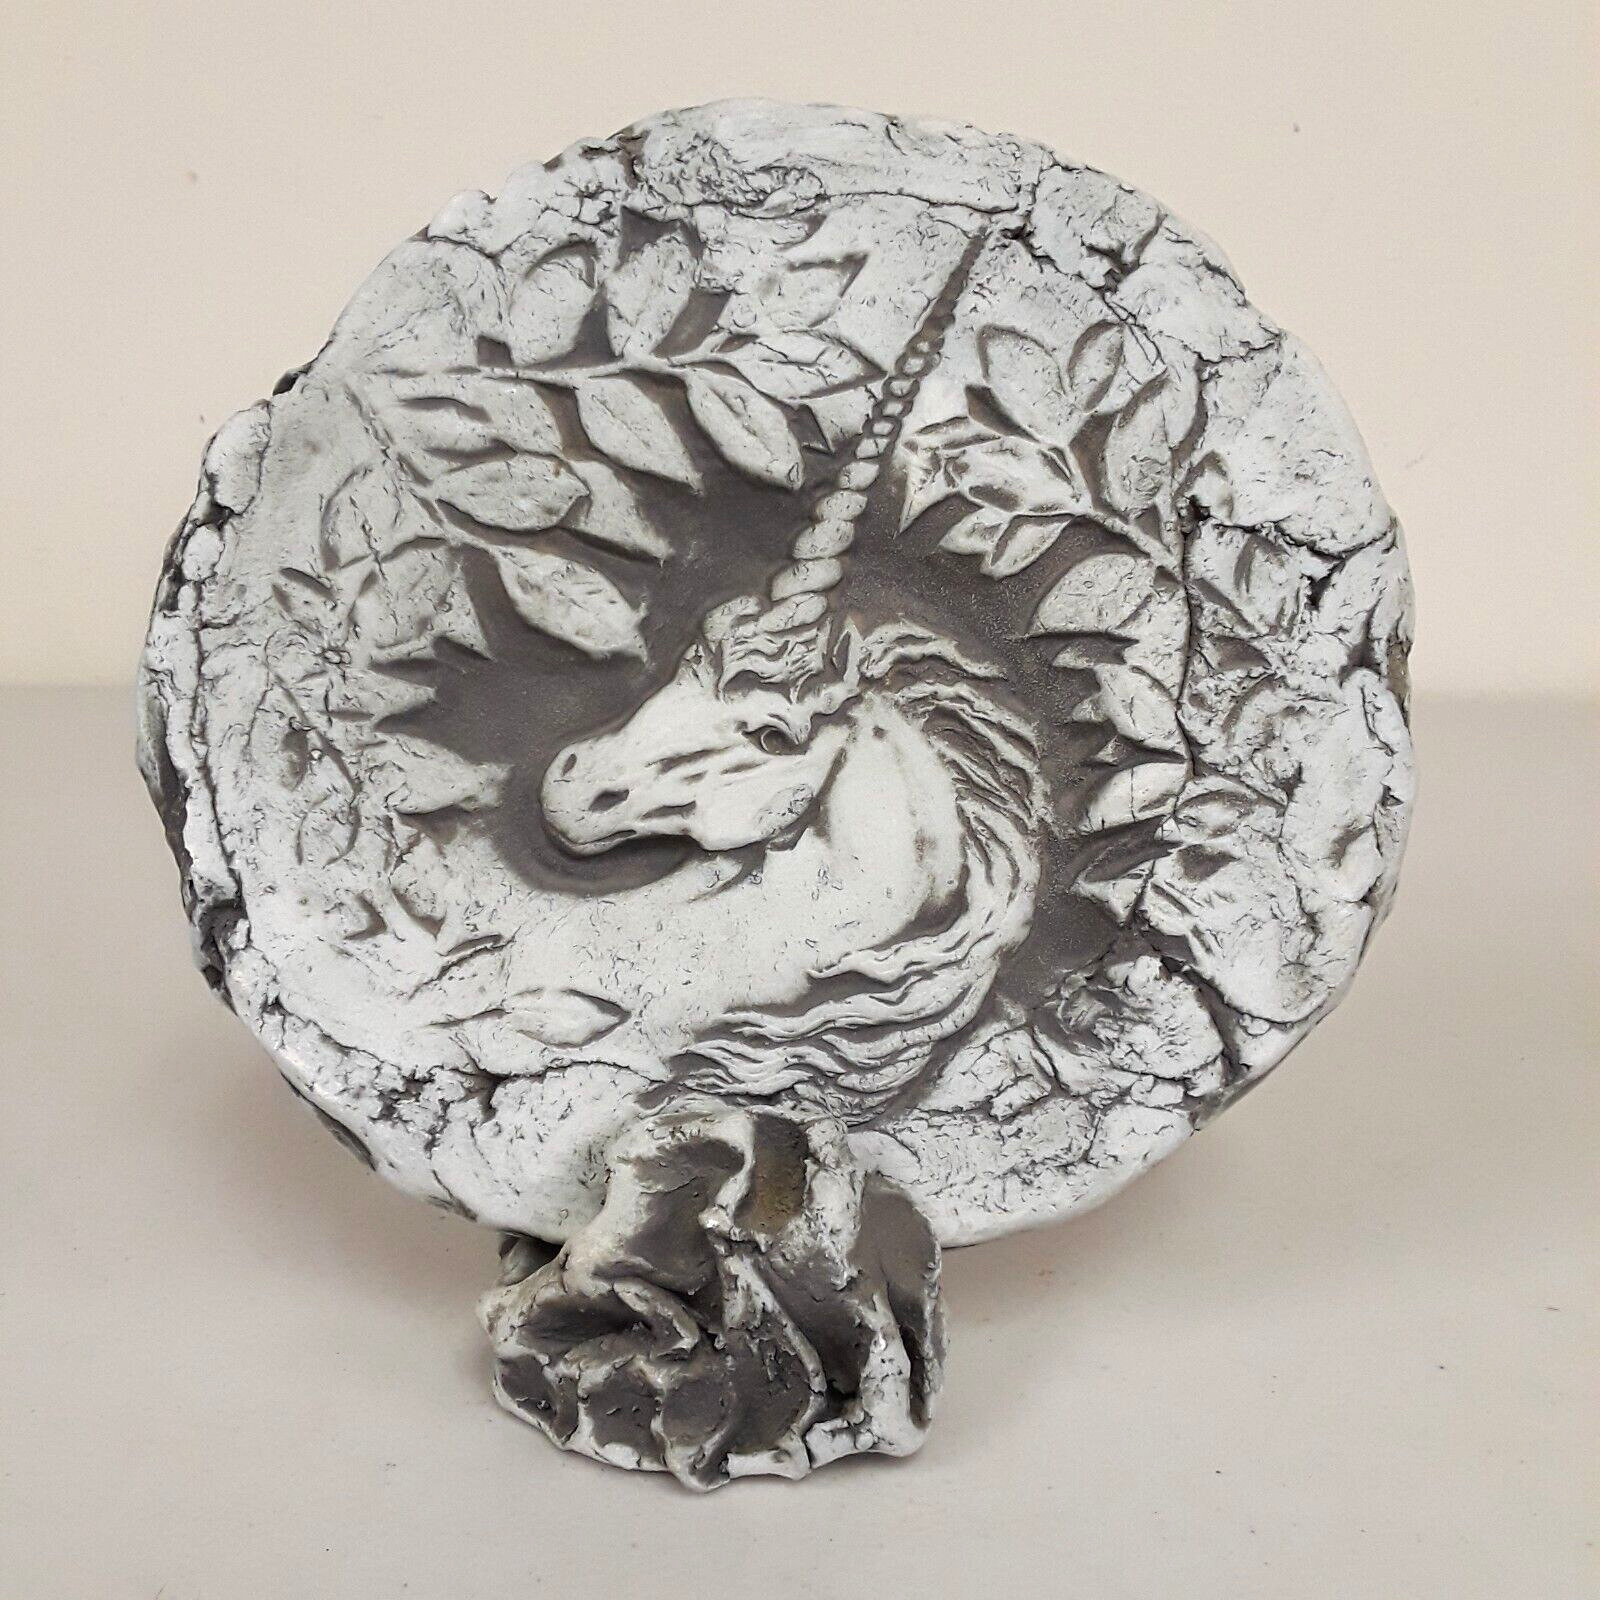 Unicorn Art Pottery Sculpture Plaque with Stand Handmade from Volcanic Ash